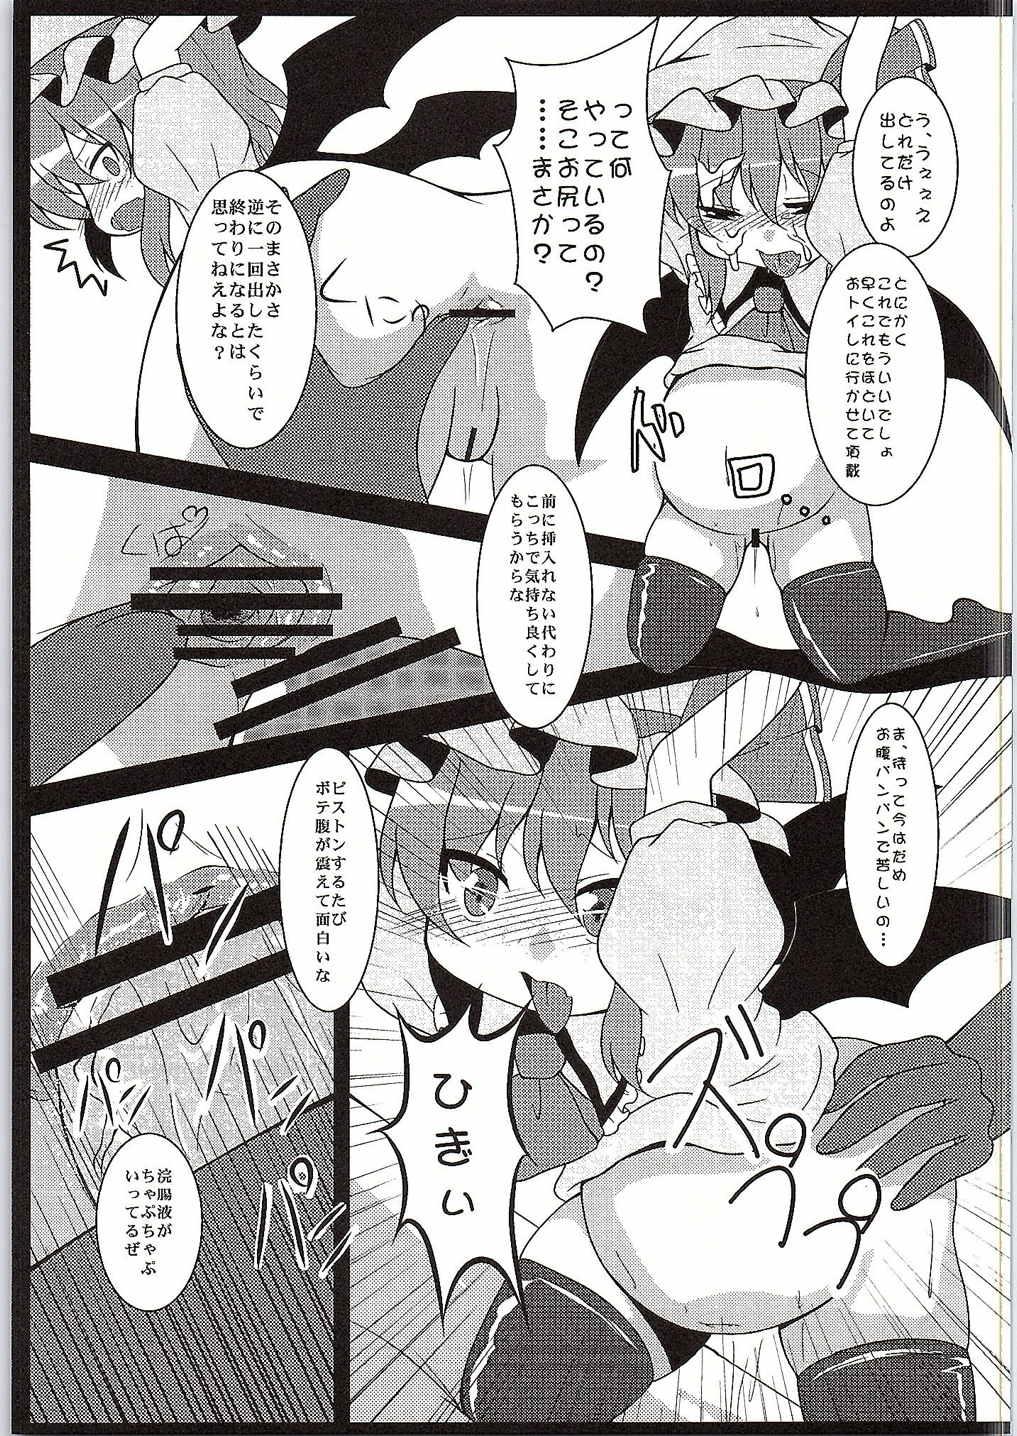 Gordita conformable with your desire - Touhou project Jockstrap - Page 6